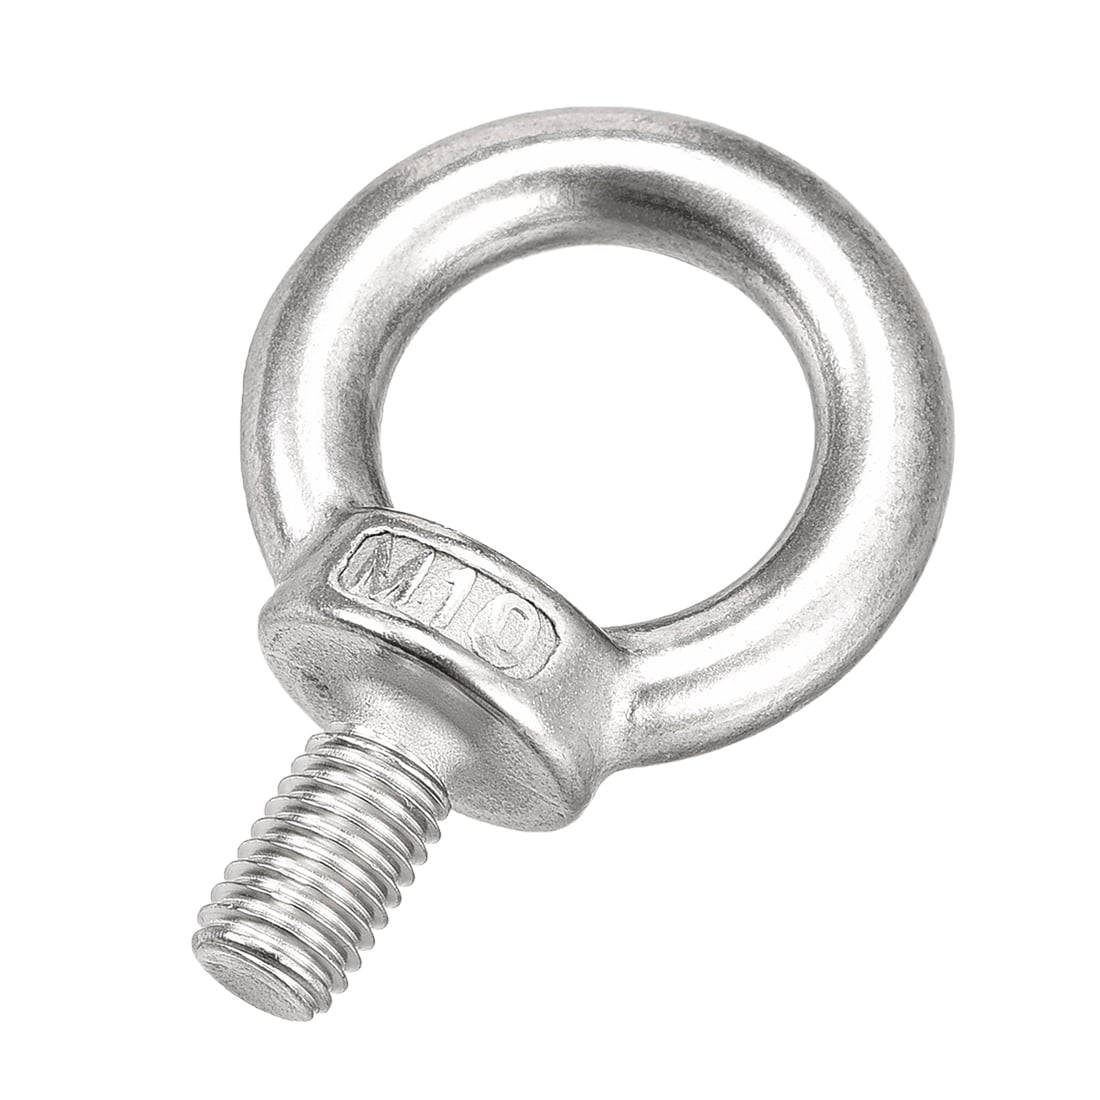 Boat M8 Lifting Forged Threaded Hanging Eye Bolt Marine 304 Stainless Steel 